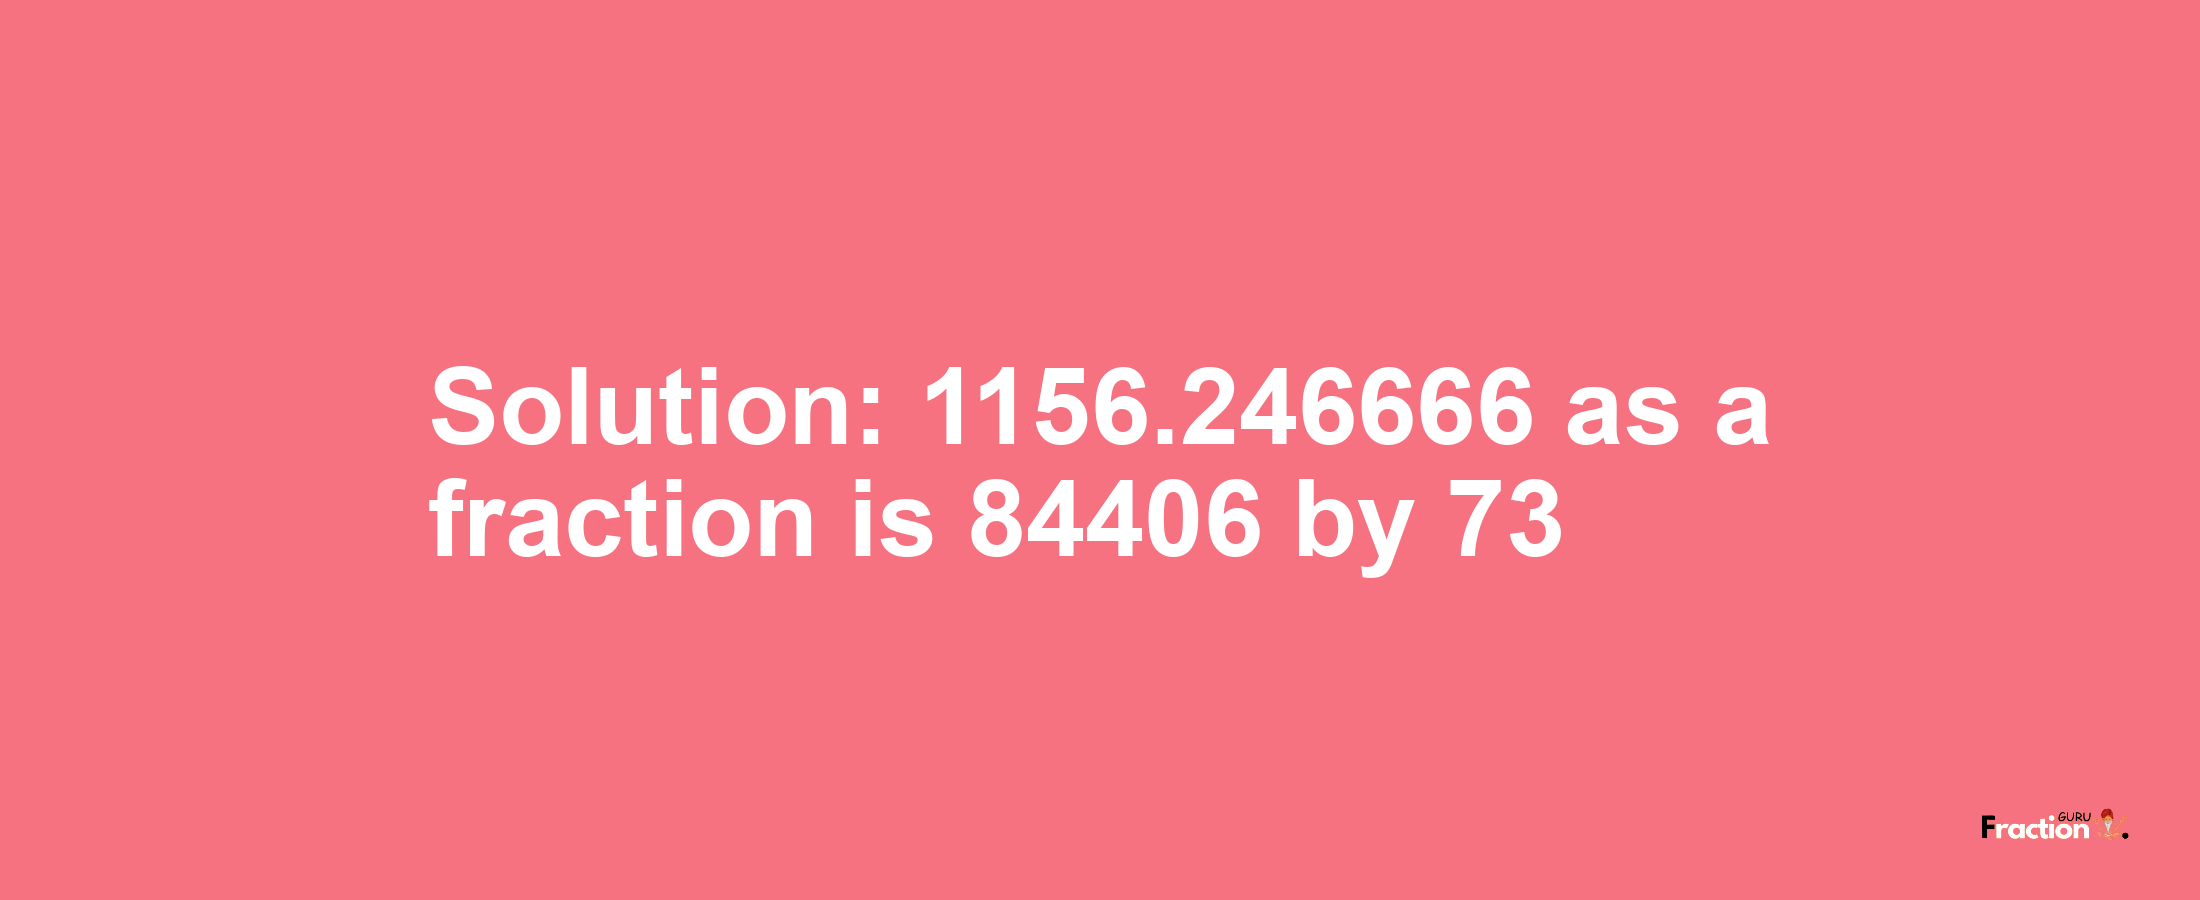 Solution:1156.246666 as a fraction is 84406/73